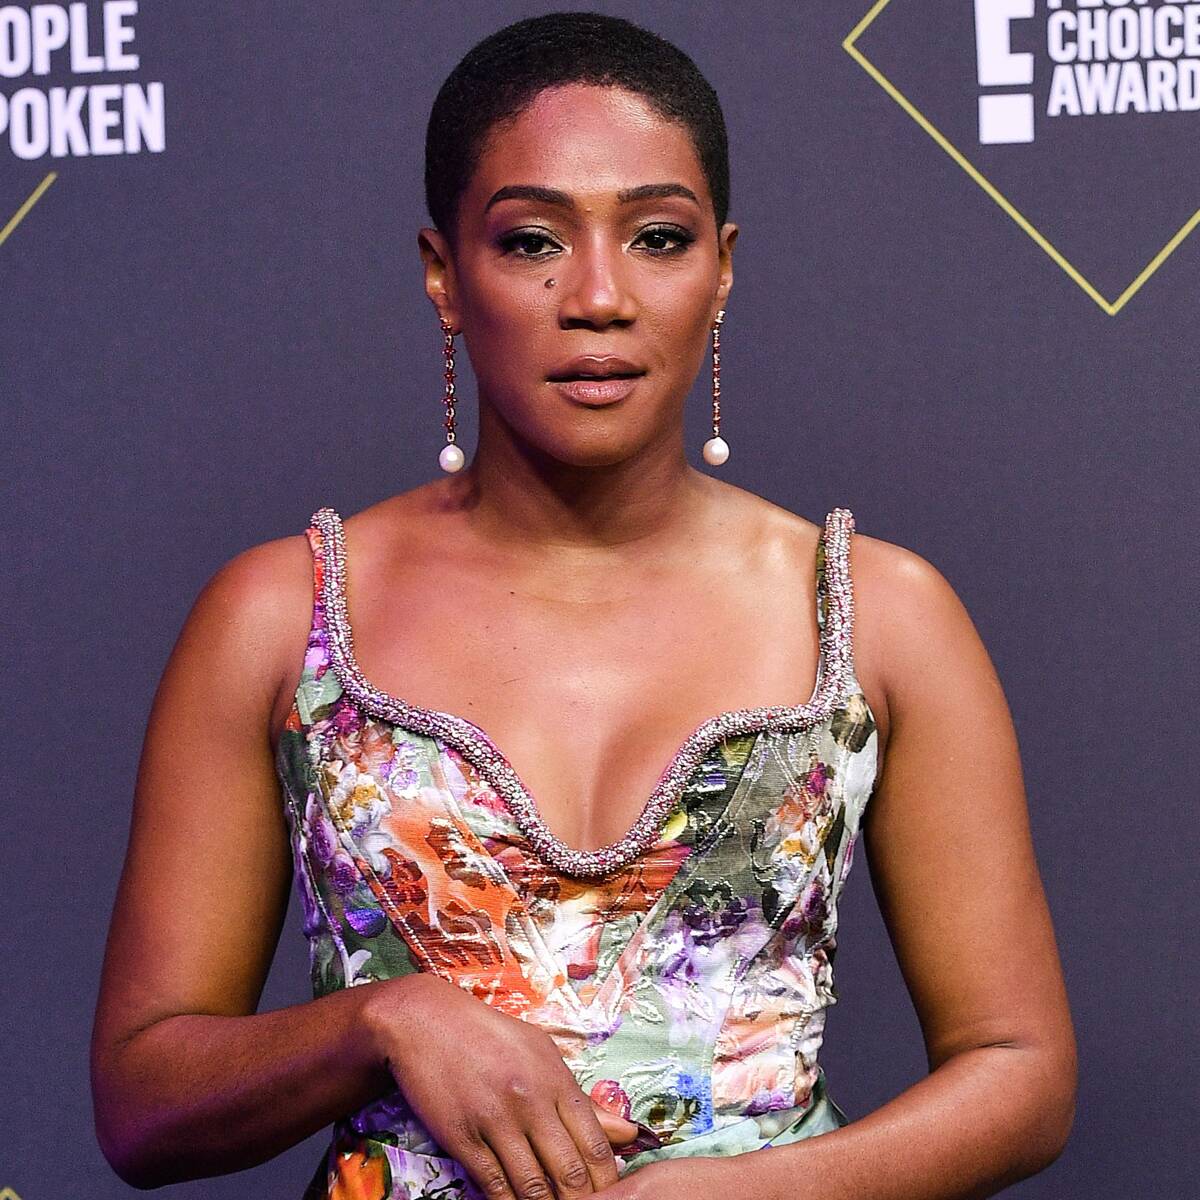 Tiffany Haddish Is Back Talking About Grapefruit—But It's Not What You Think